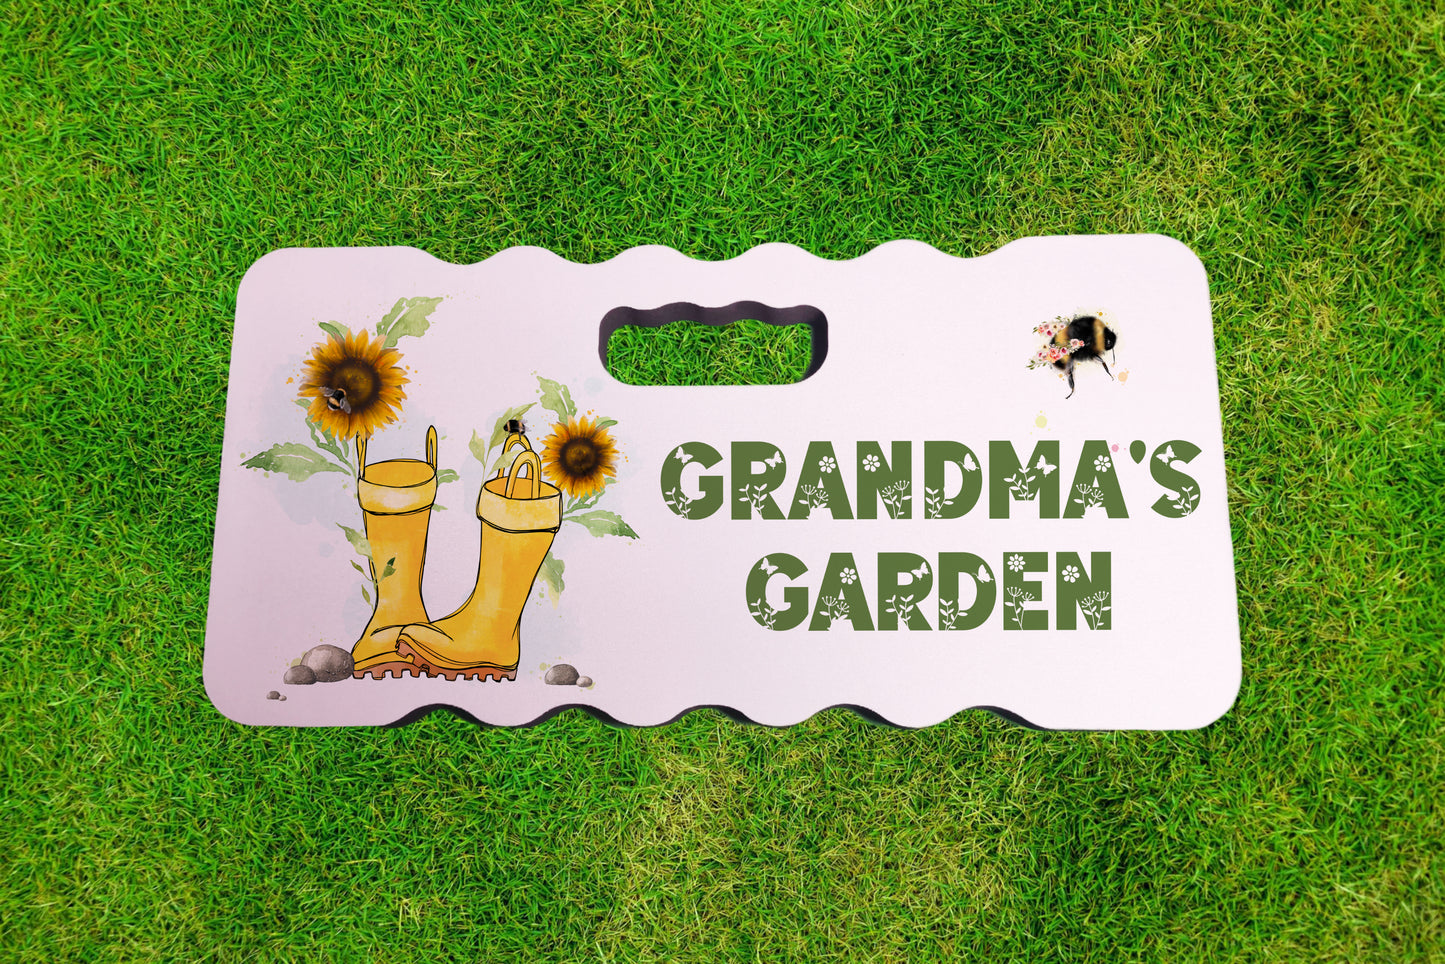 Personalised foam garden kneeling pad with an image of yellow wellies and sunflowers